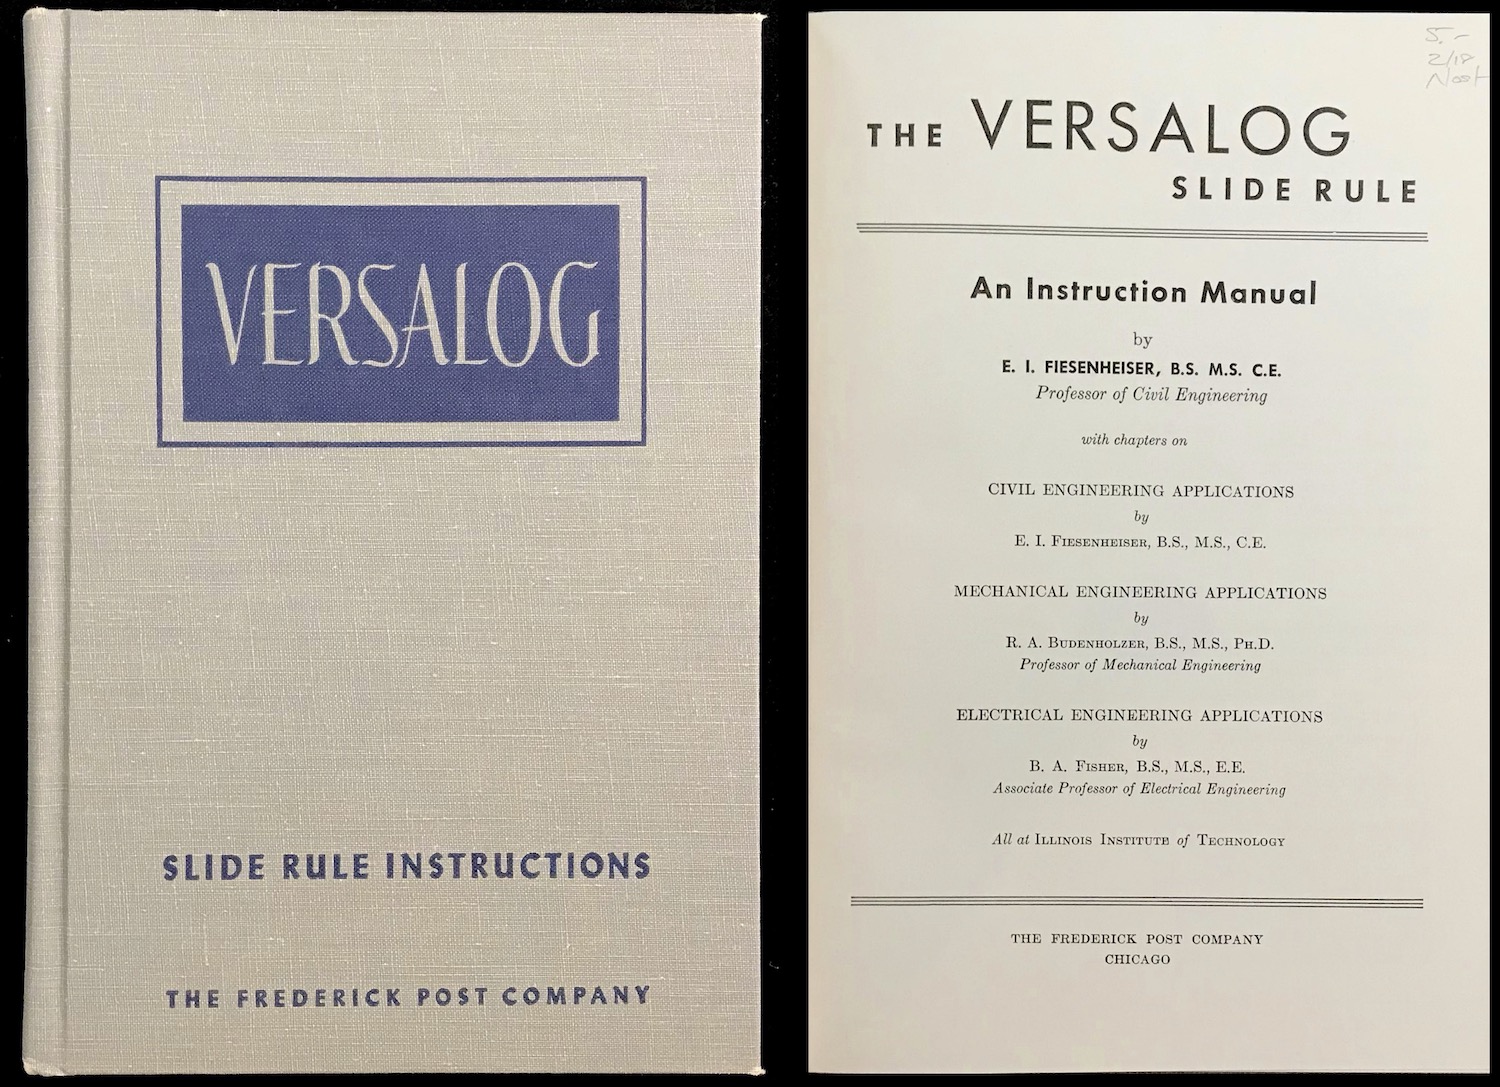 The Versalog Slide Rule: An Instruction Manual, 1951.